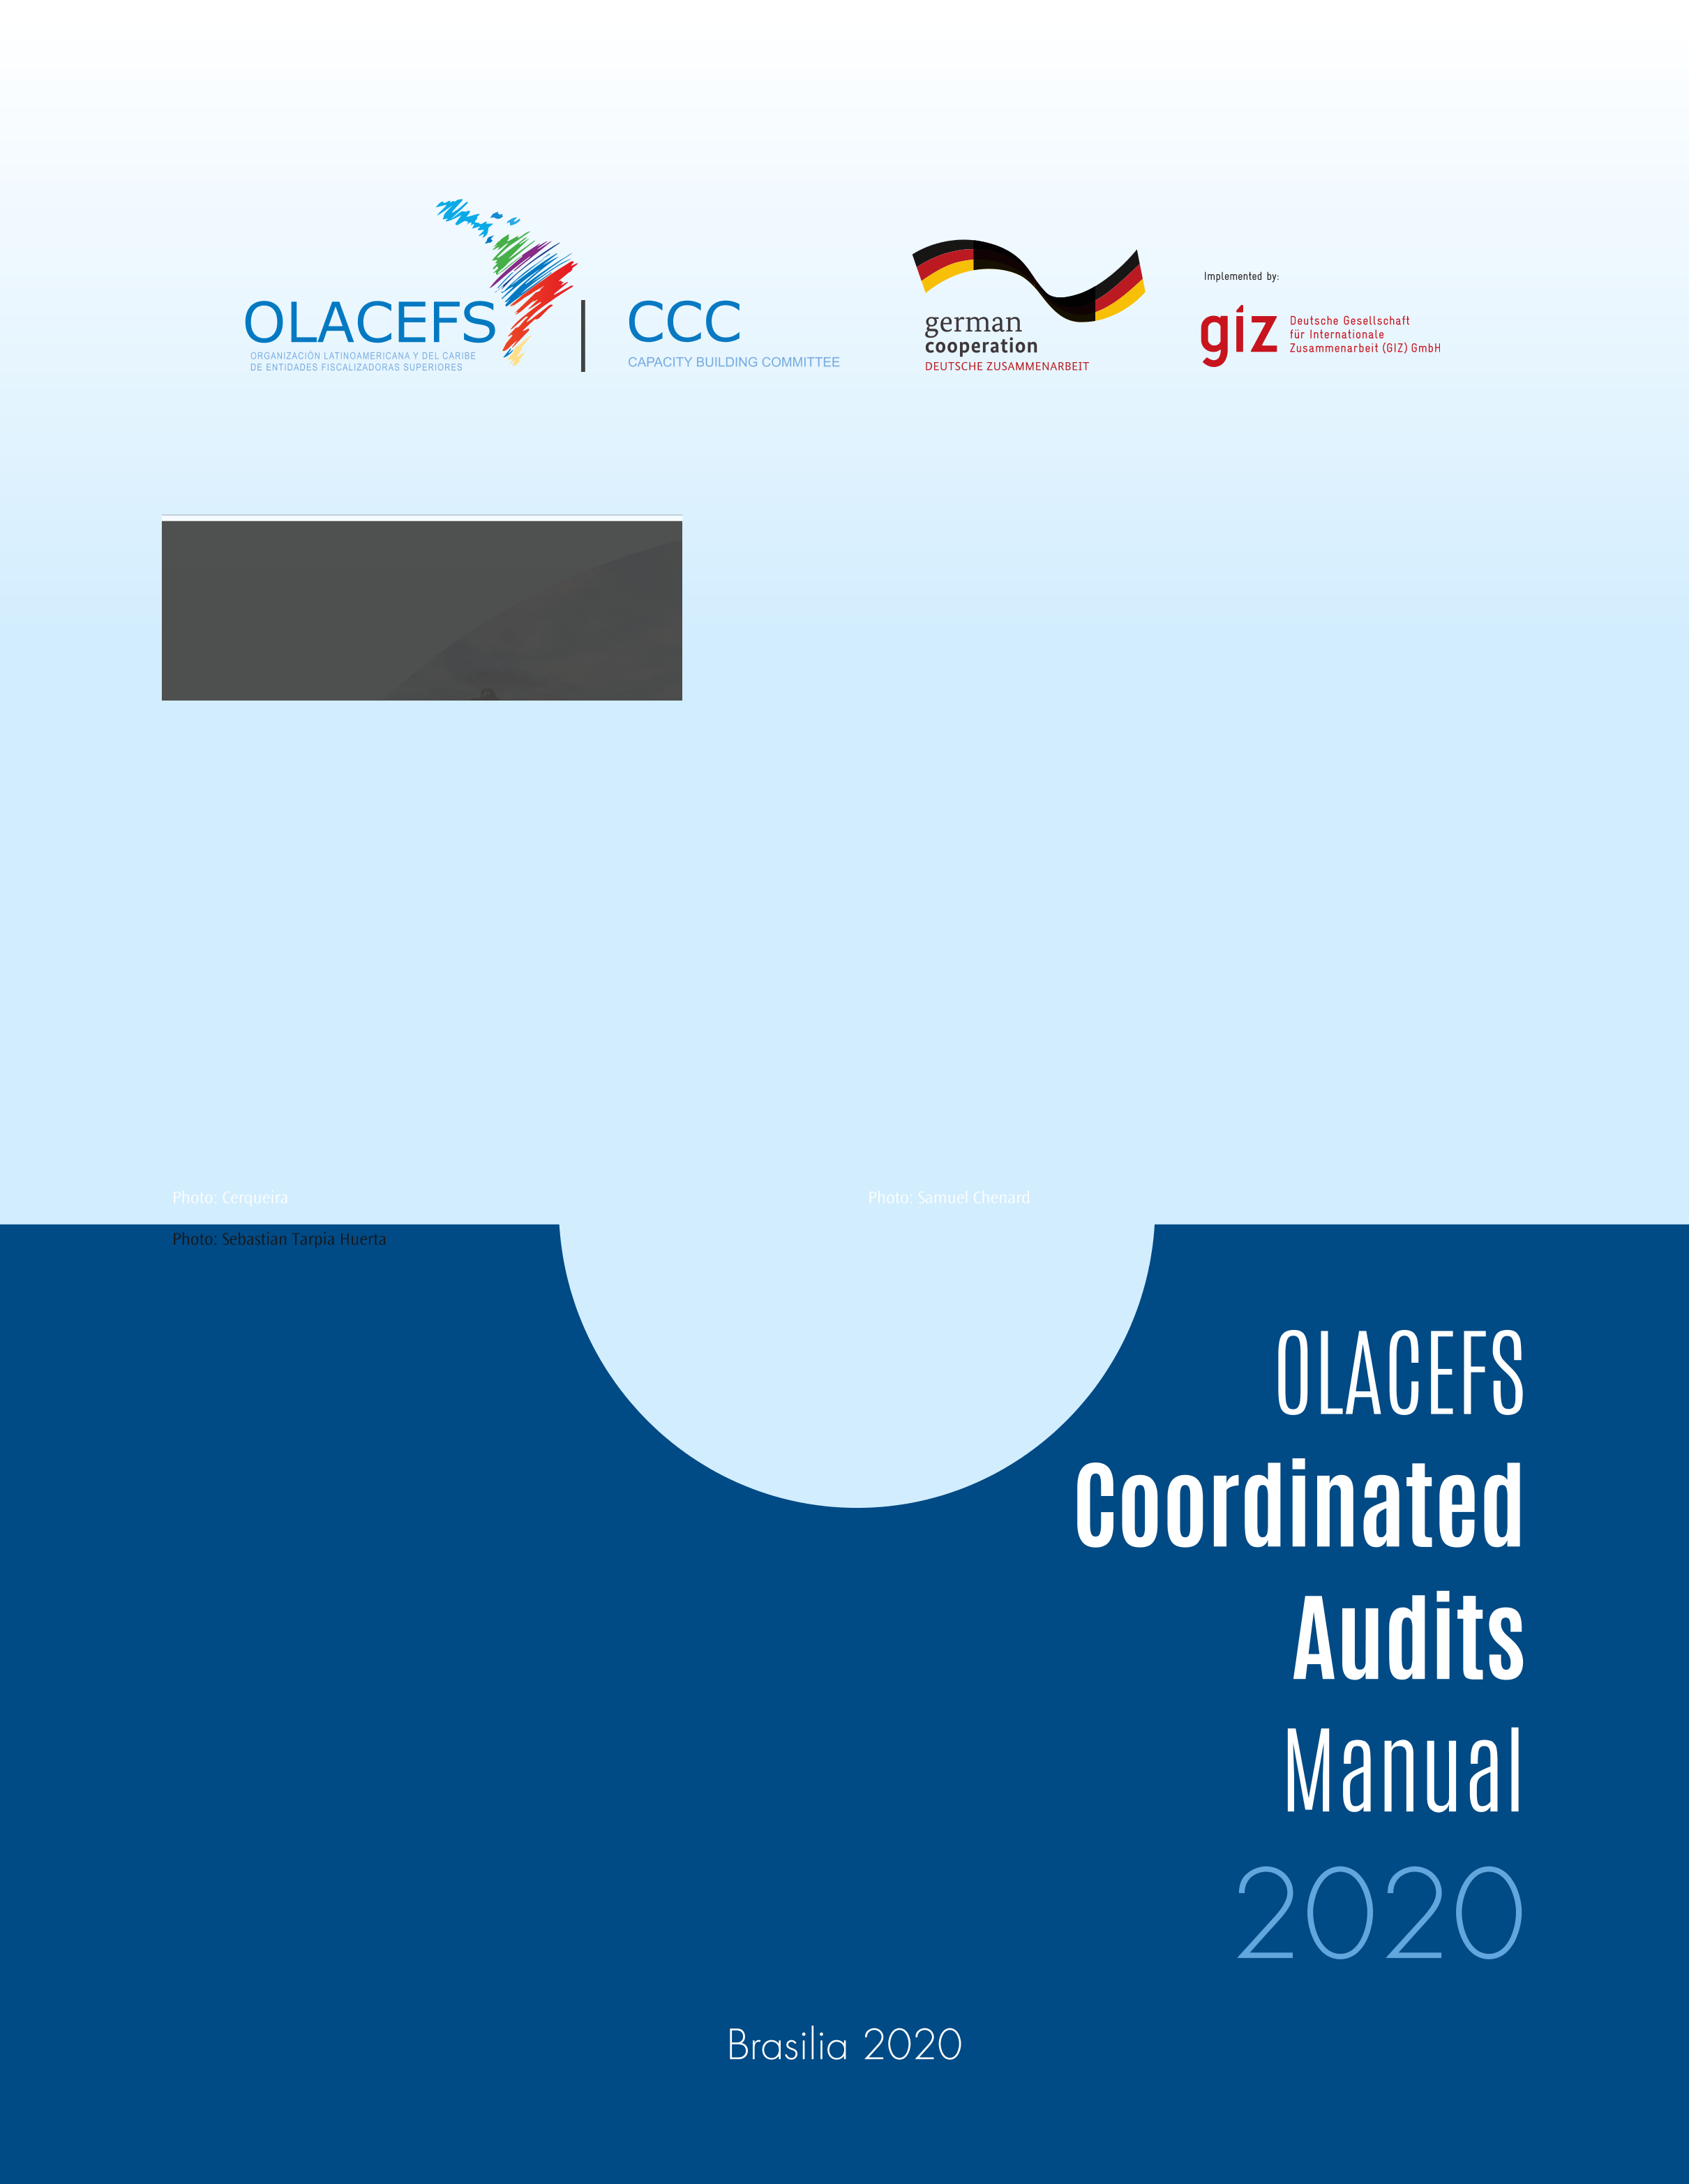 olacefs-coordinated-audits-manual_2020.png